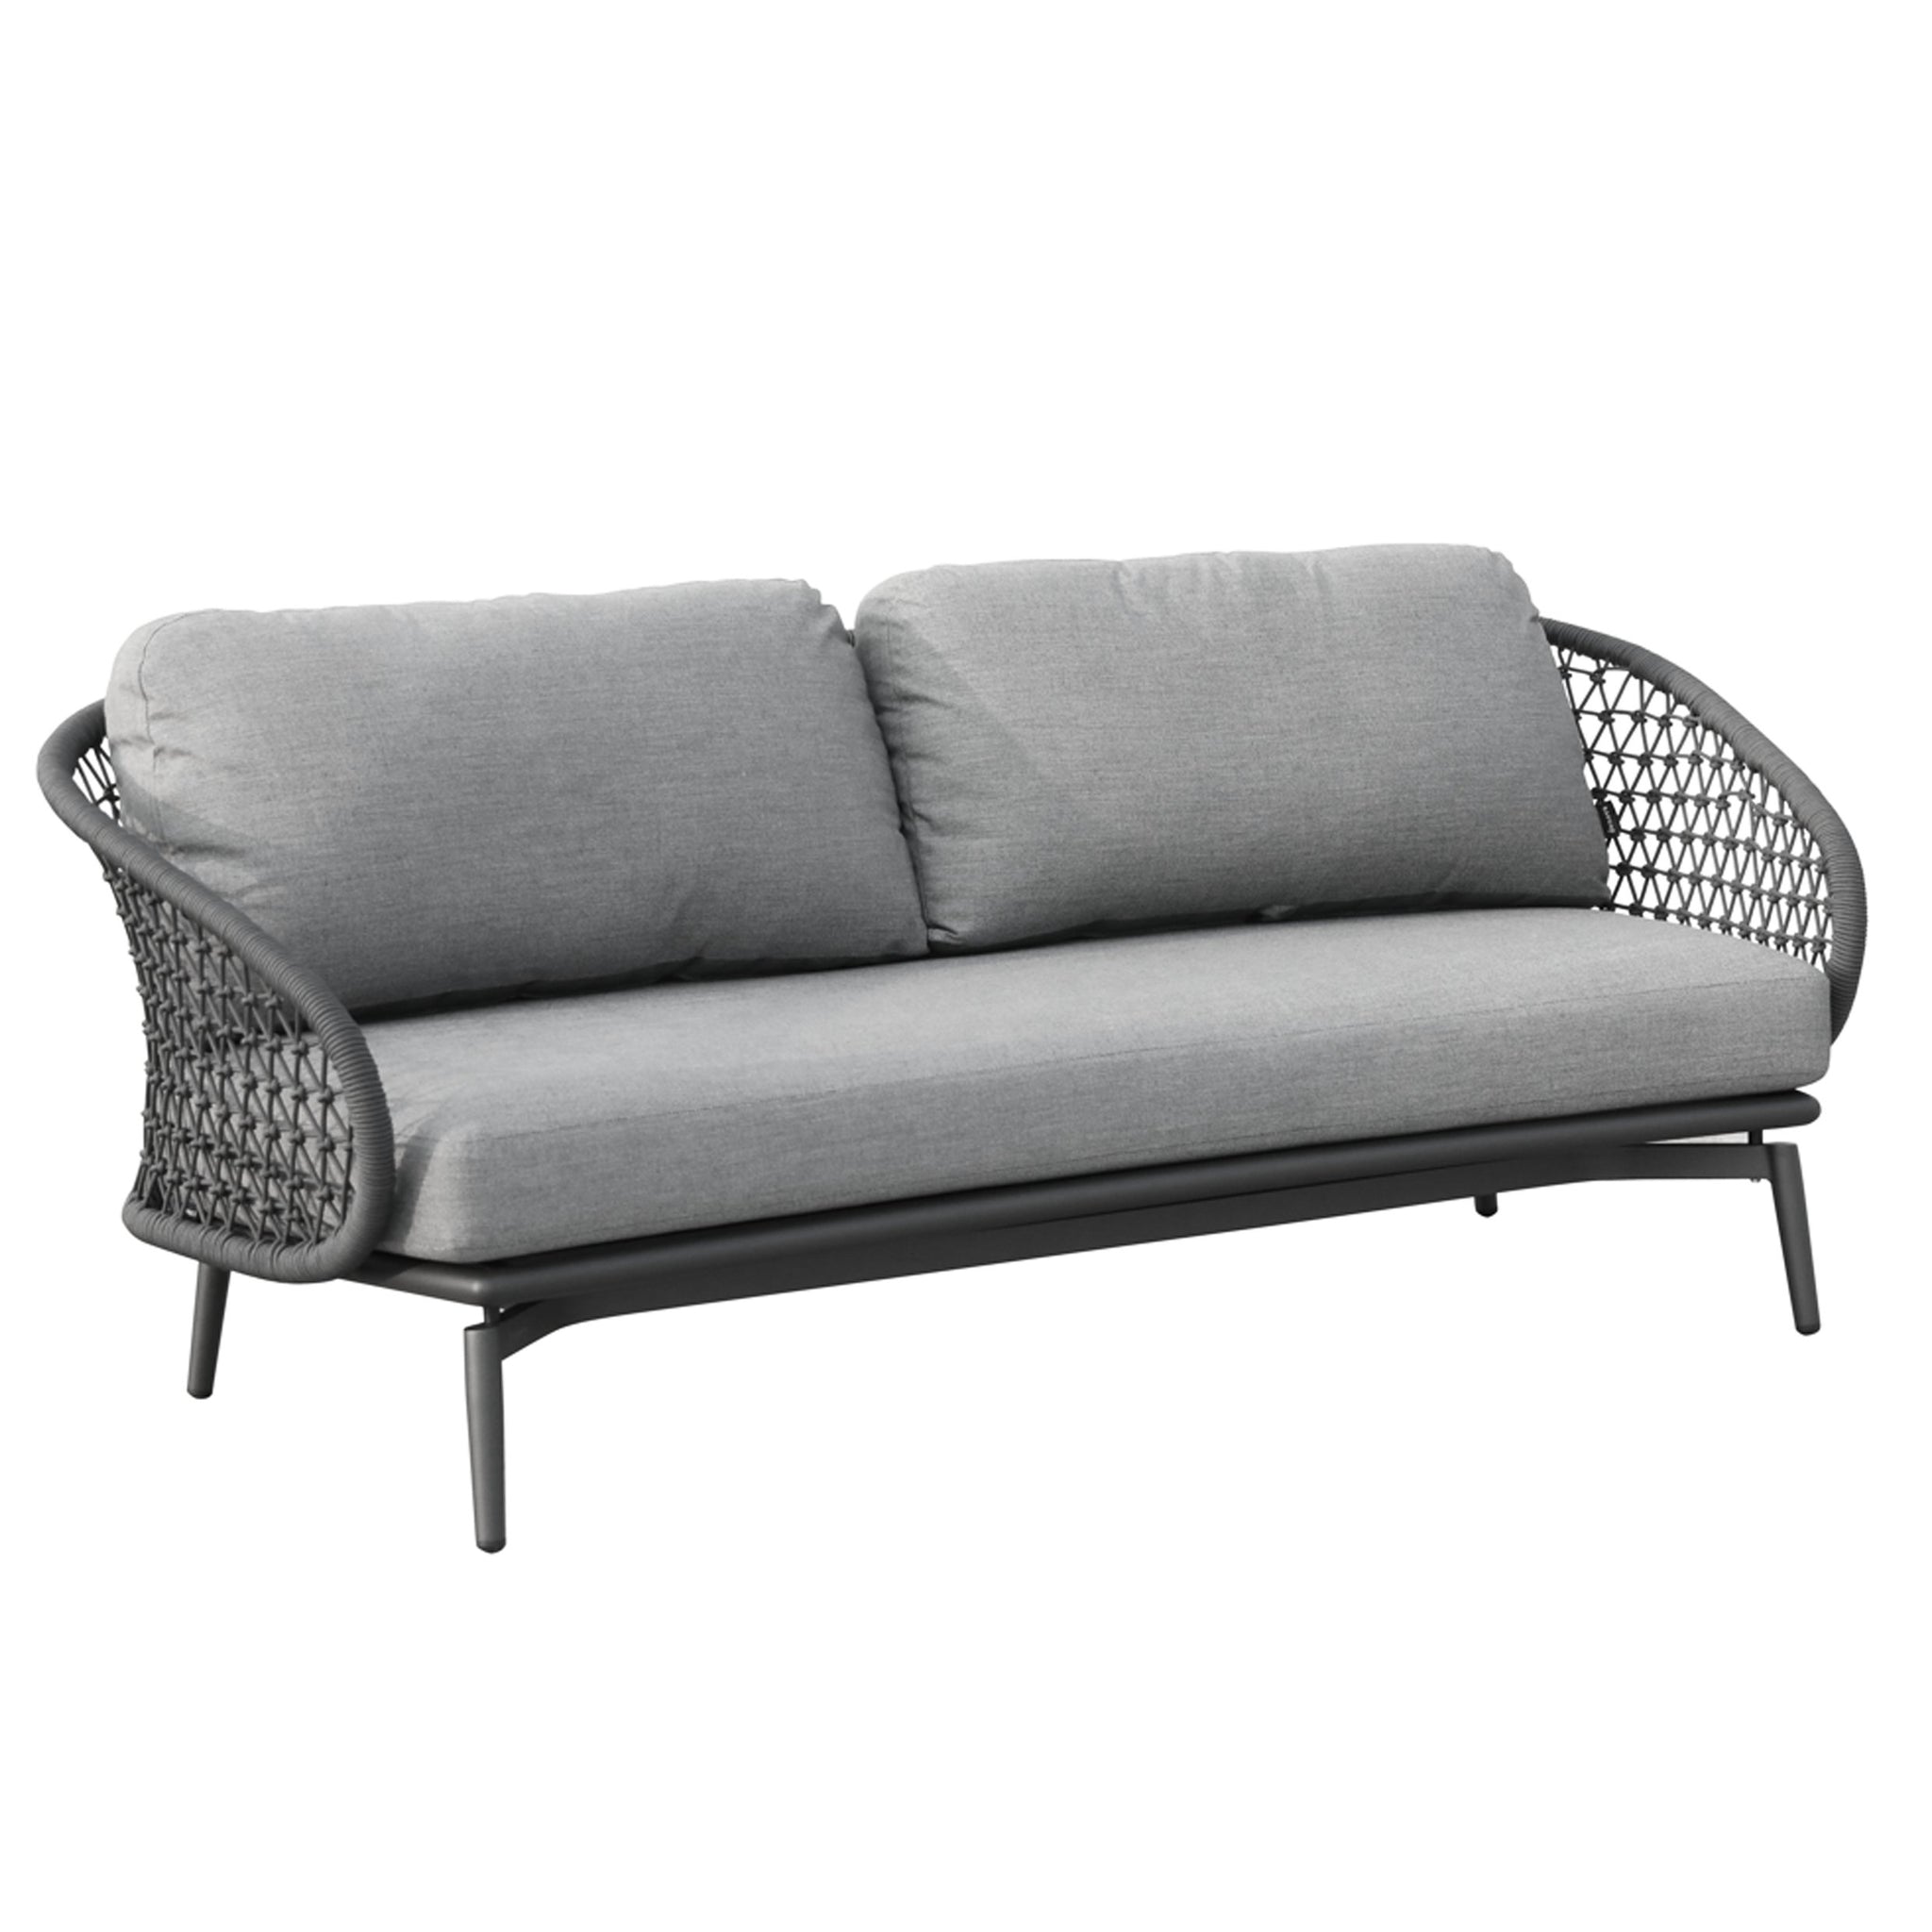 Verona Two Seater Outdoor Lounge - Charcoal - Olan Living